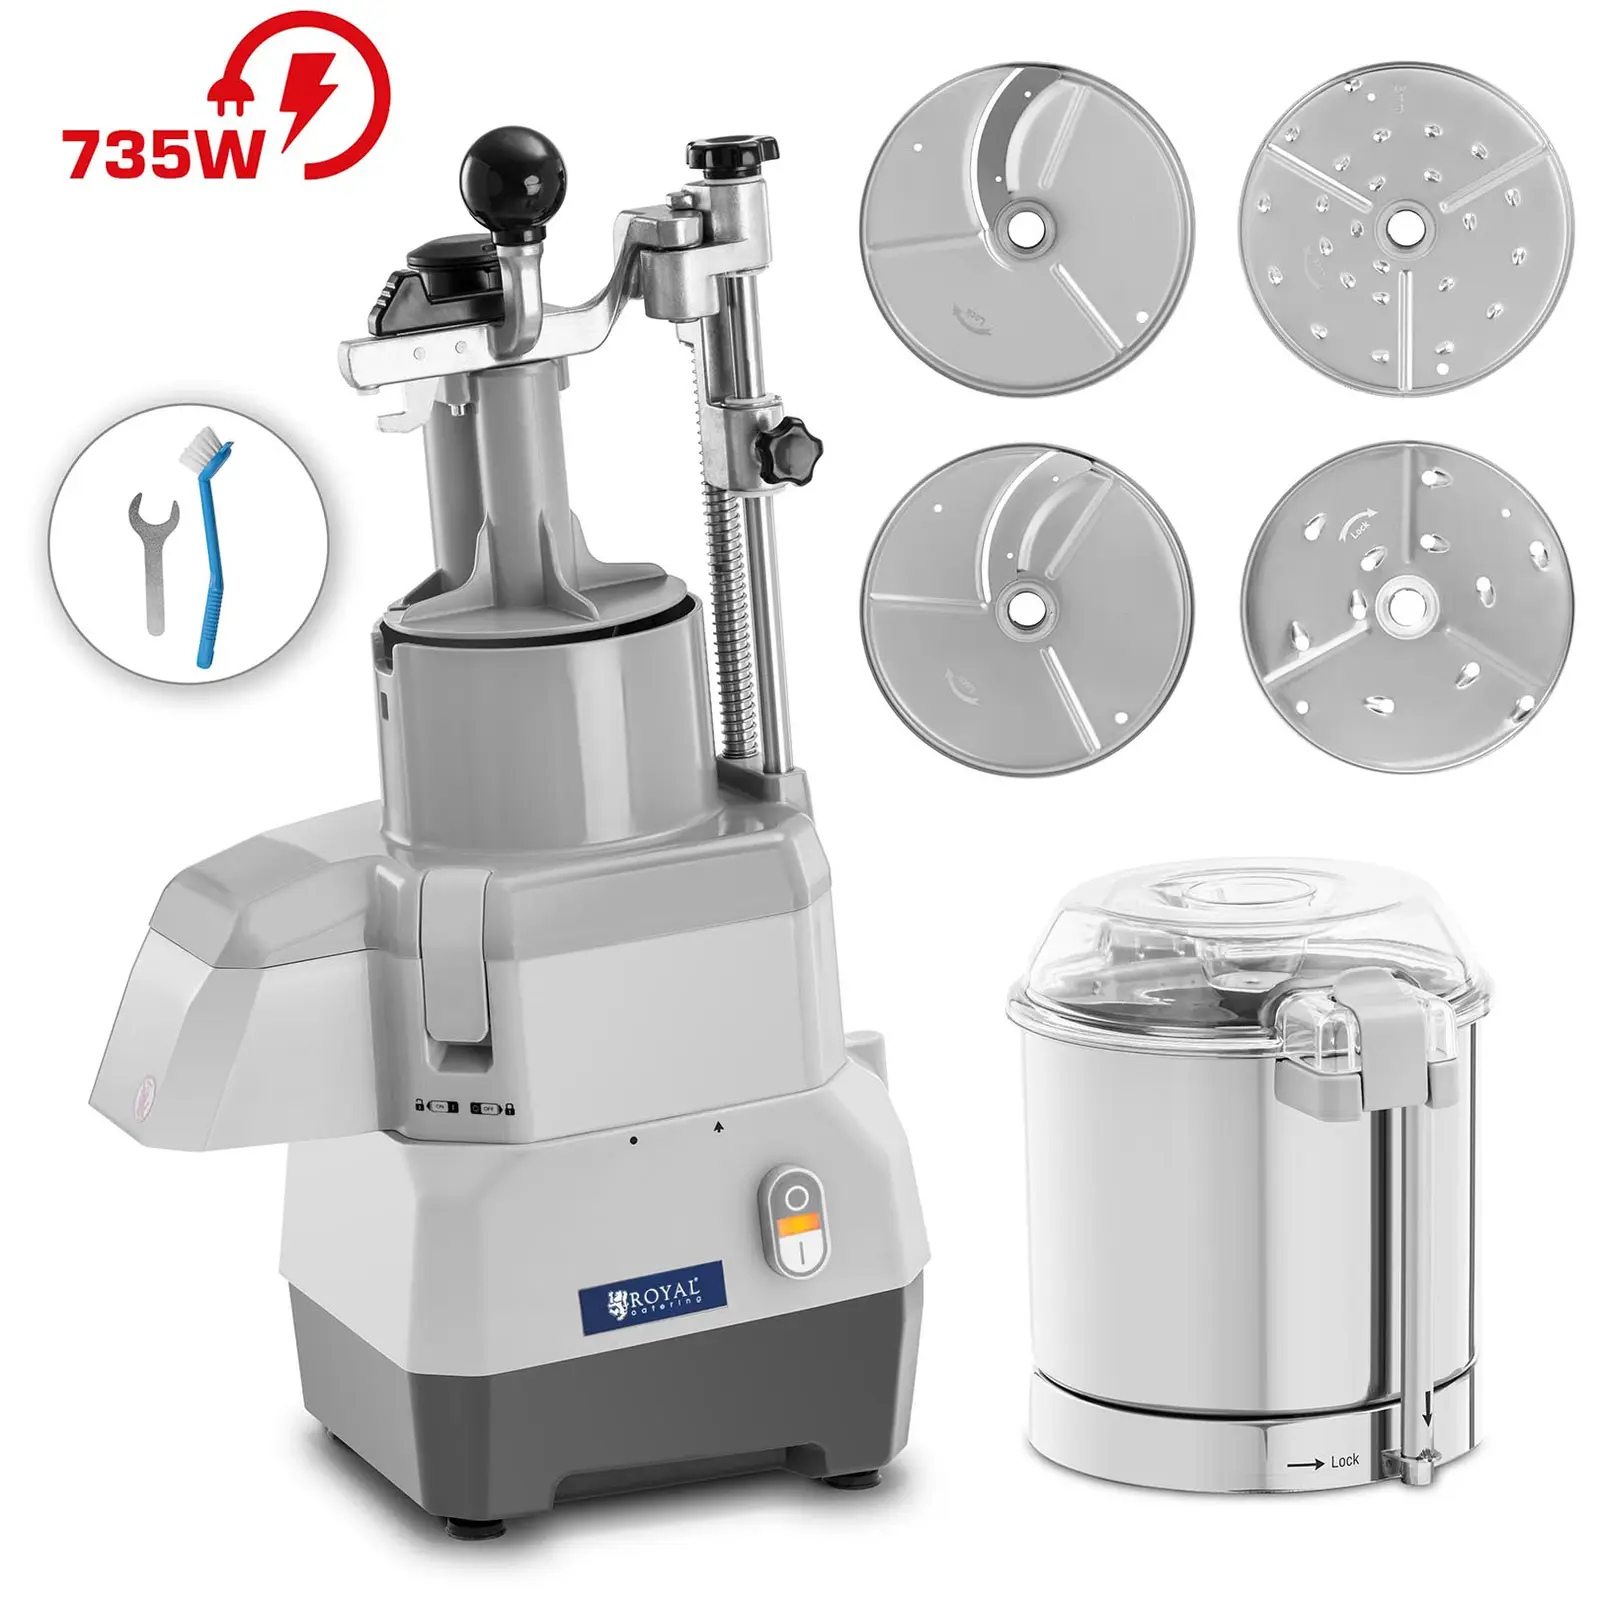 Vegetable slicer electric plus table cutter 5 l - 735 W - 4 knife discs - Ø 174 mm - Royal Catering